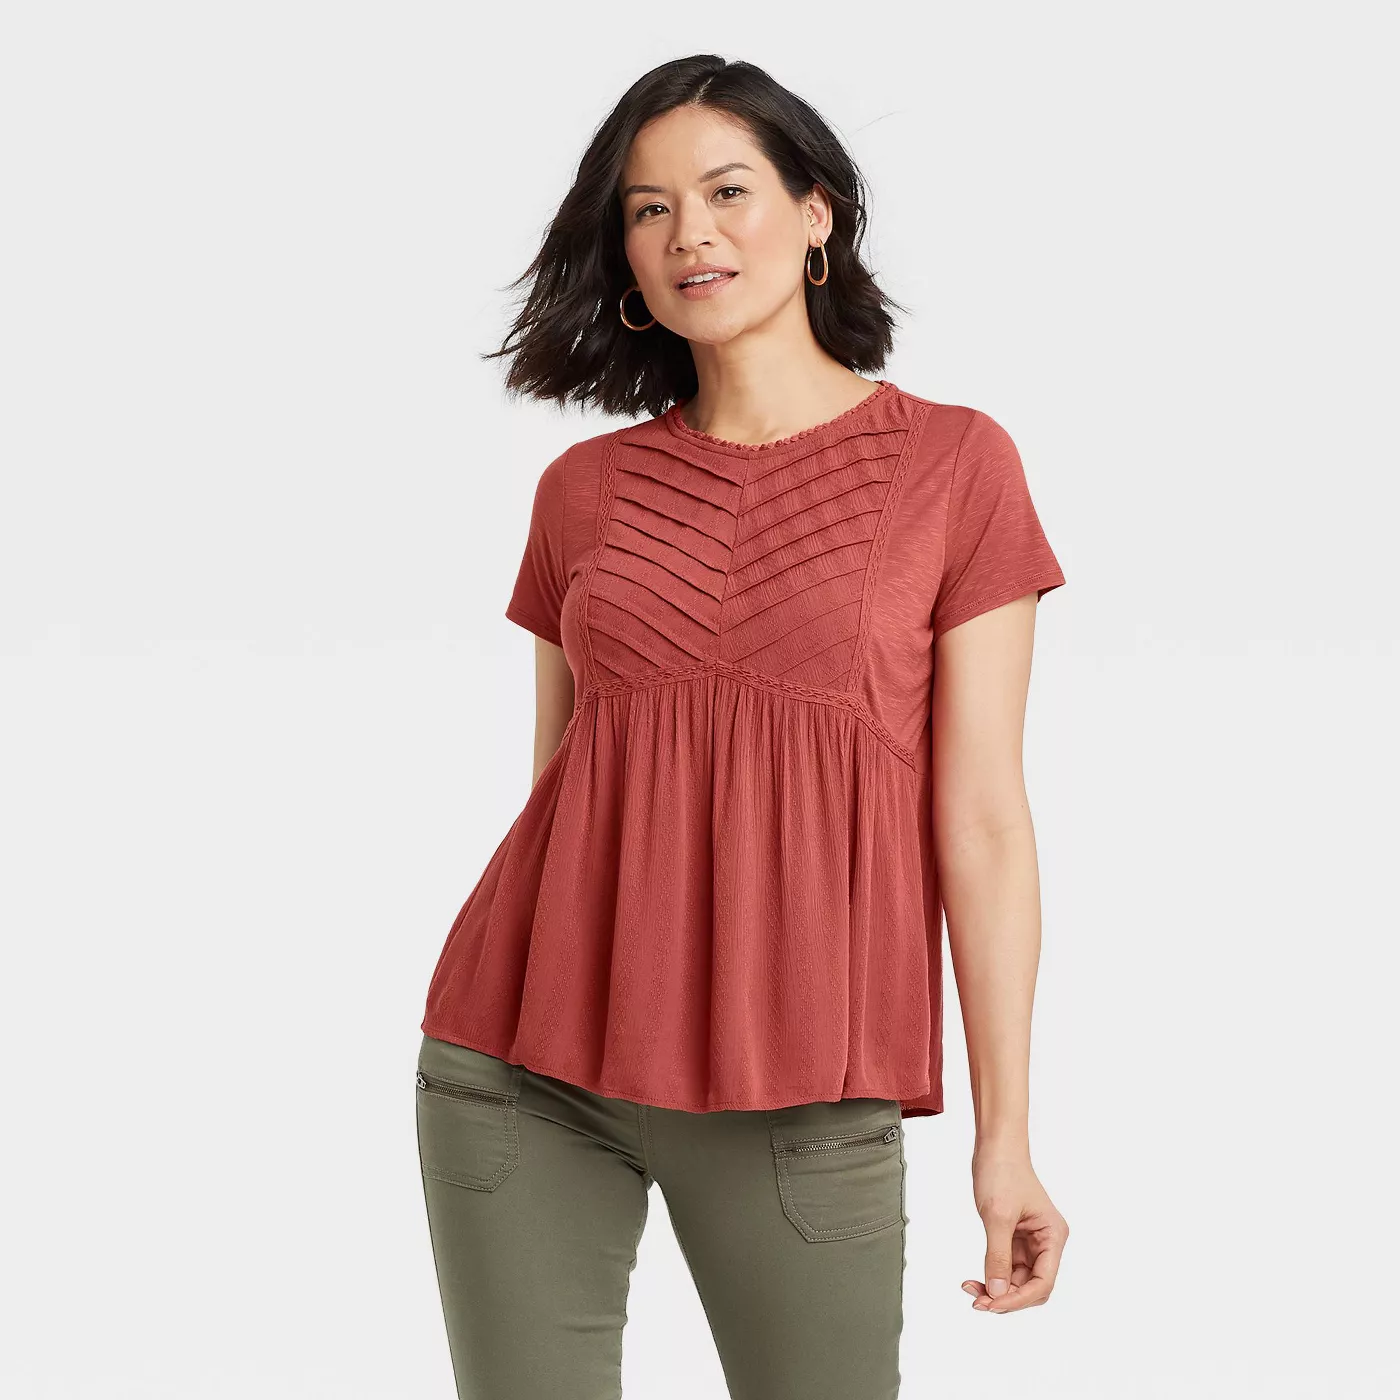 Women's Short Sleeve Pleat Detail Knit Top - Knox Rose™  - image 1 of 4